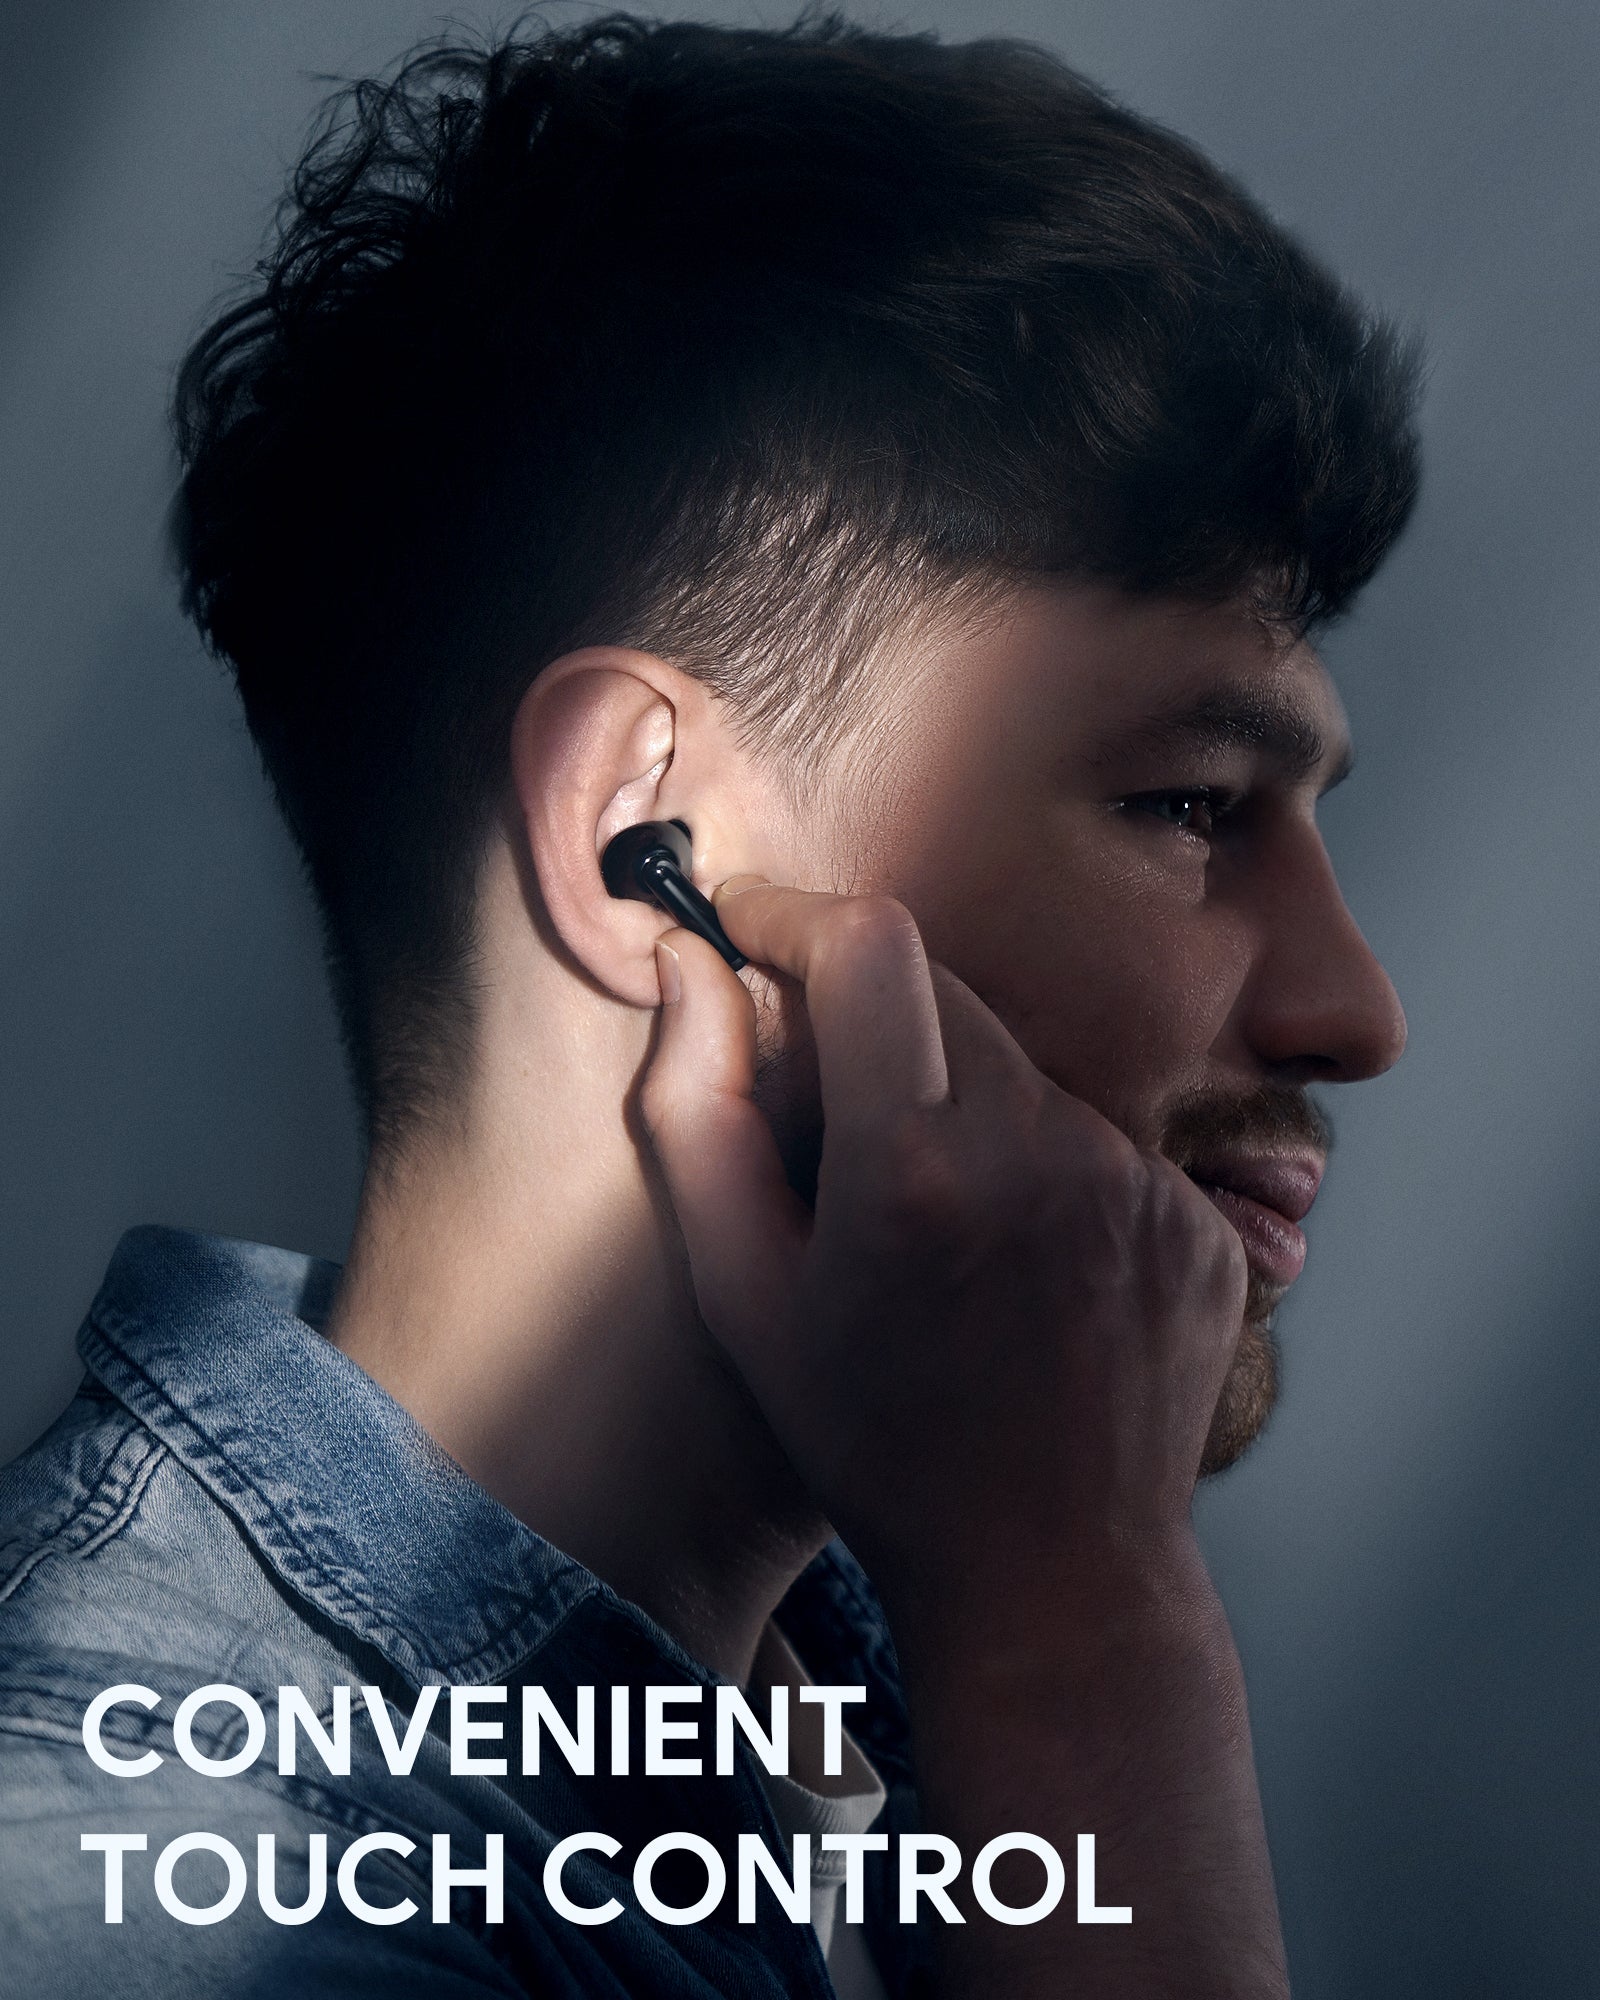 AUKEY EP-N6 Beyond  Portable True Wireless Eearbuds With Hybrid ANC